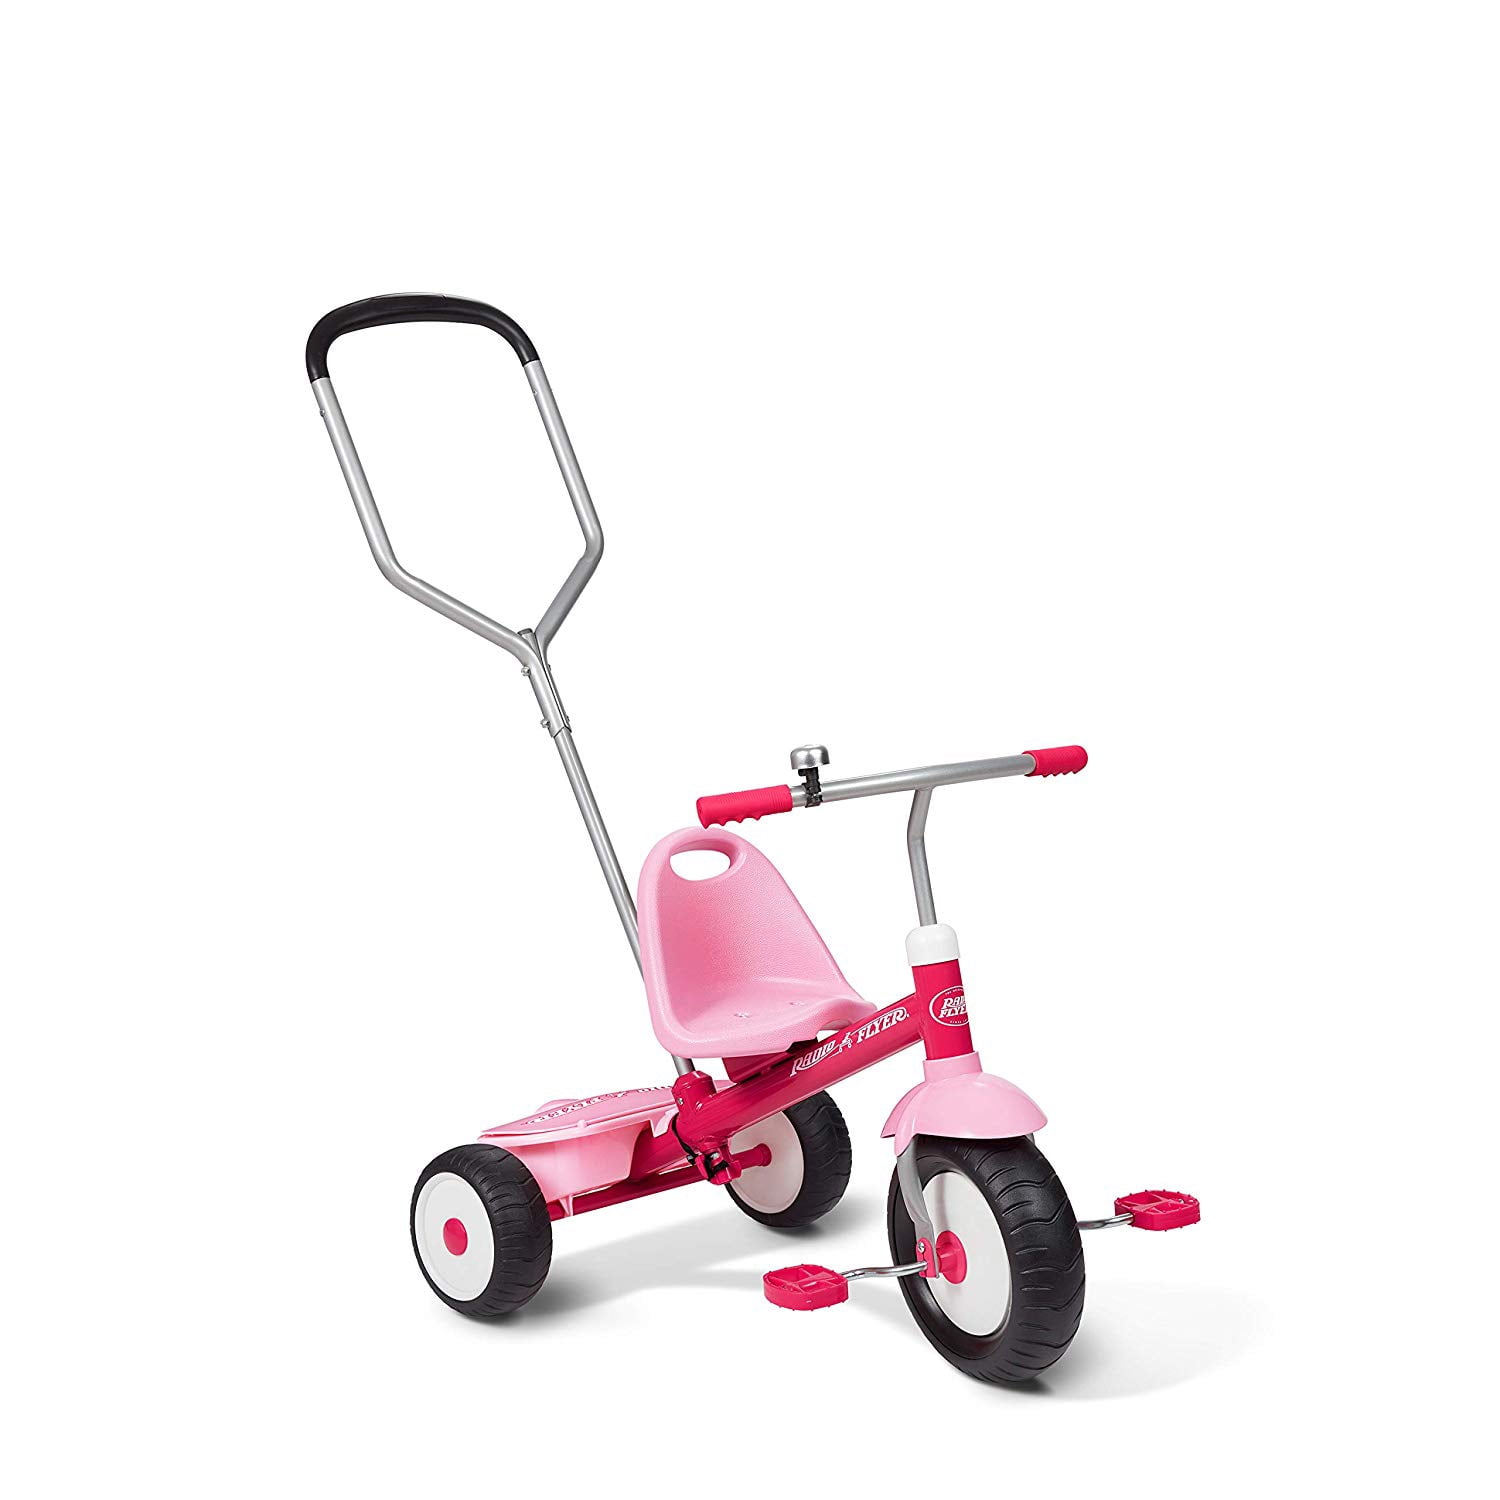 Details about   Radio Flyer Classic Red Dual Deck Tricycle 